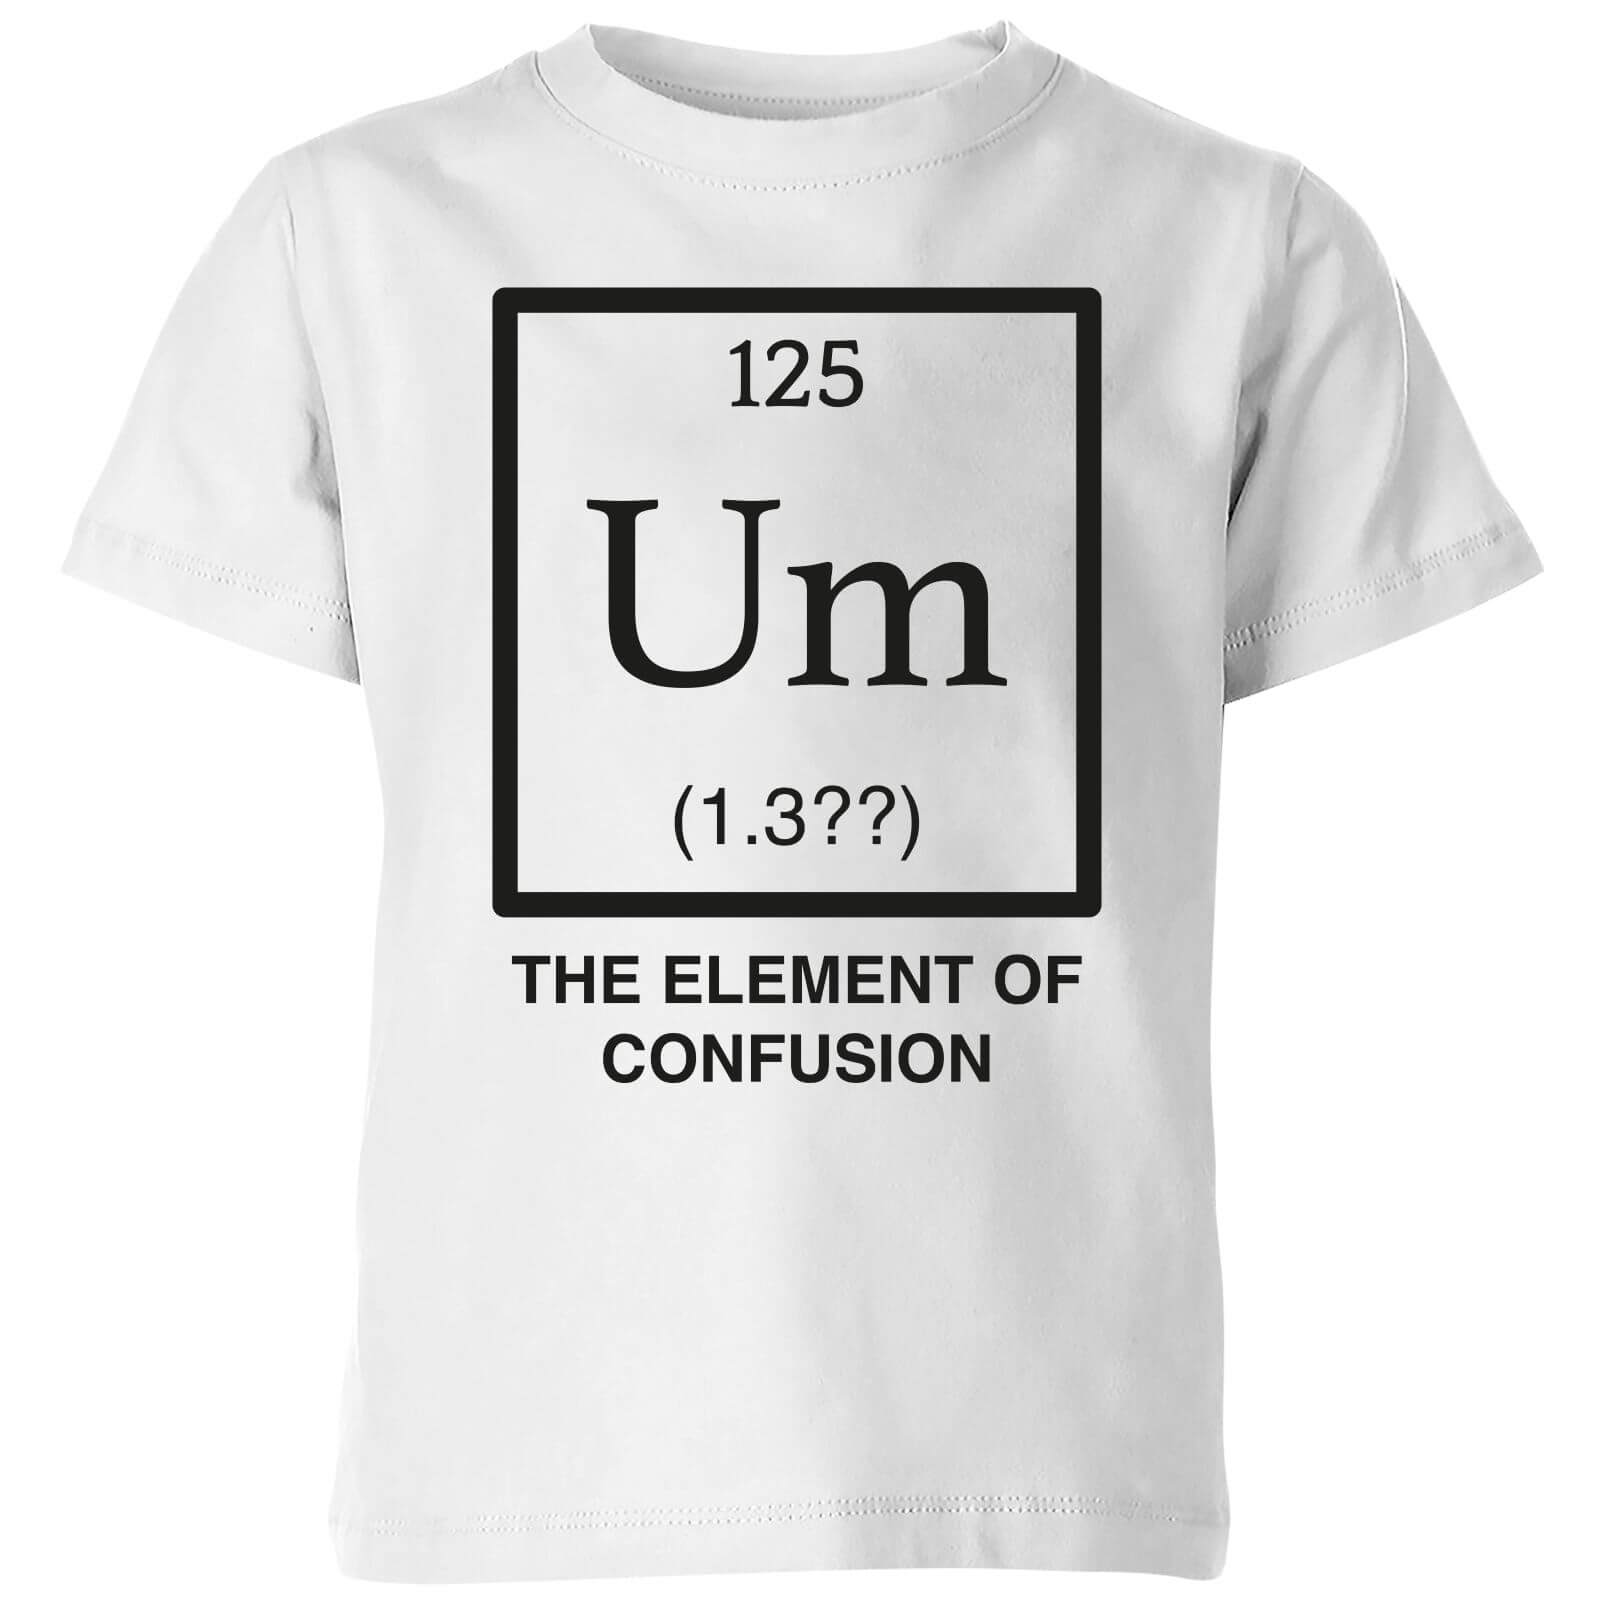 The Element Of Confusion Kids' T-Shirt - White - 3-4 Years - White